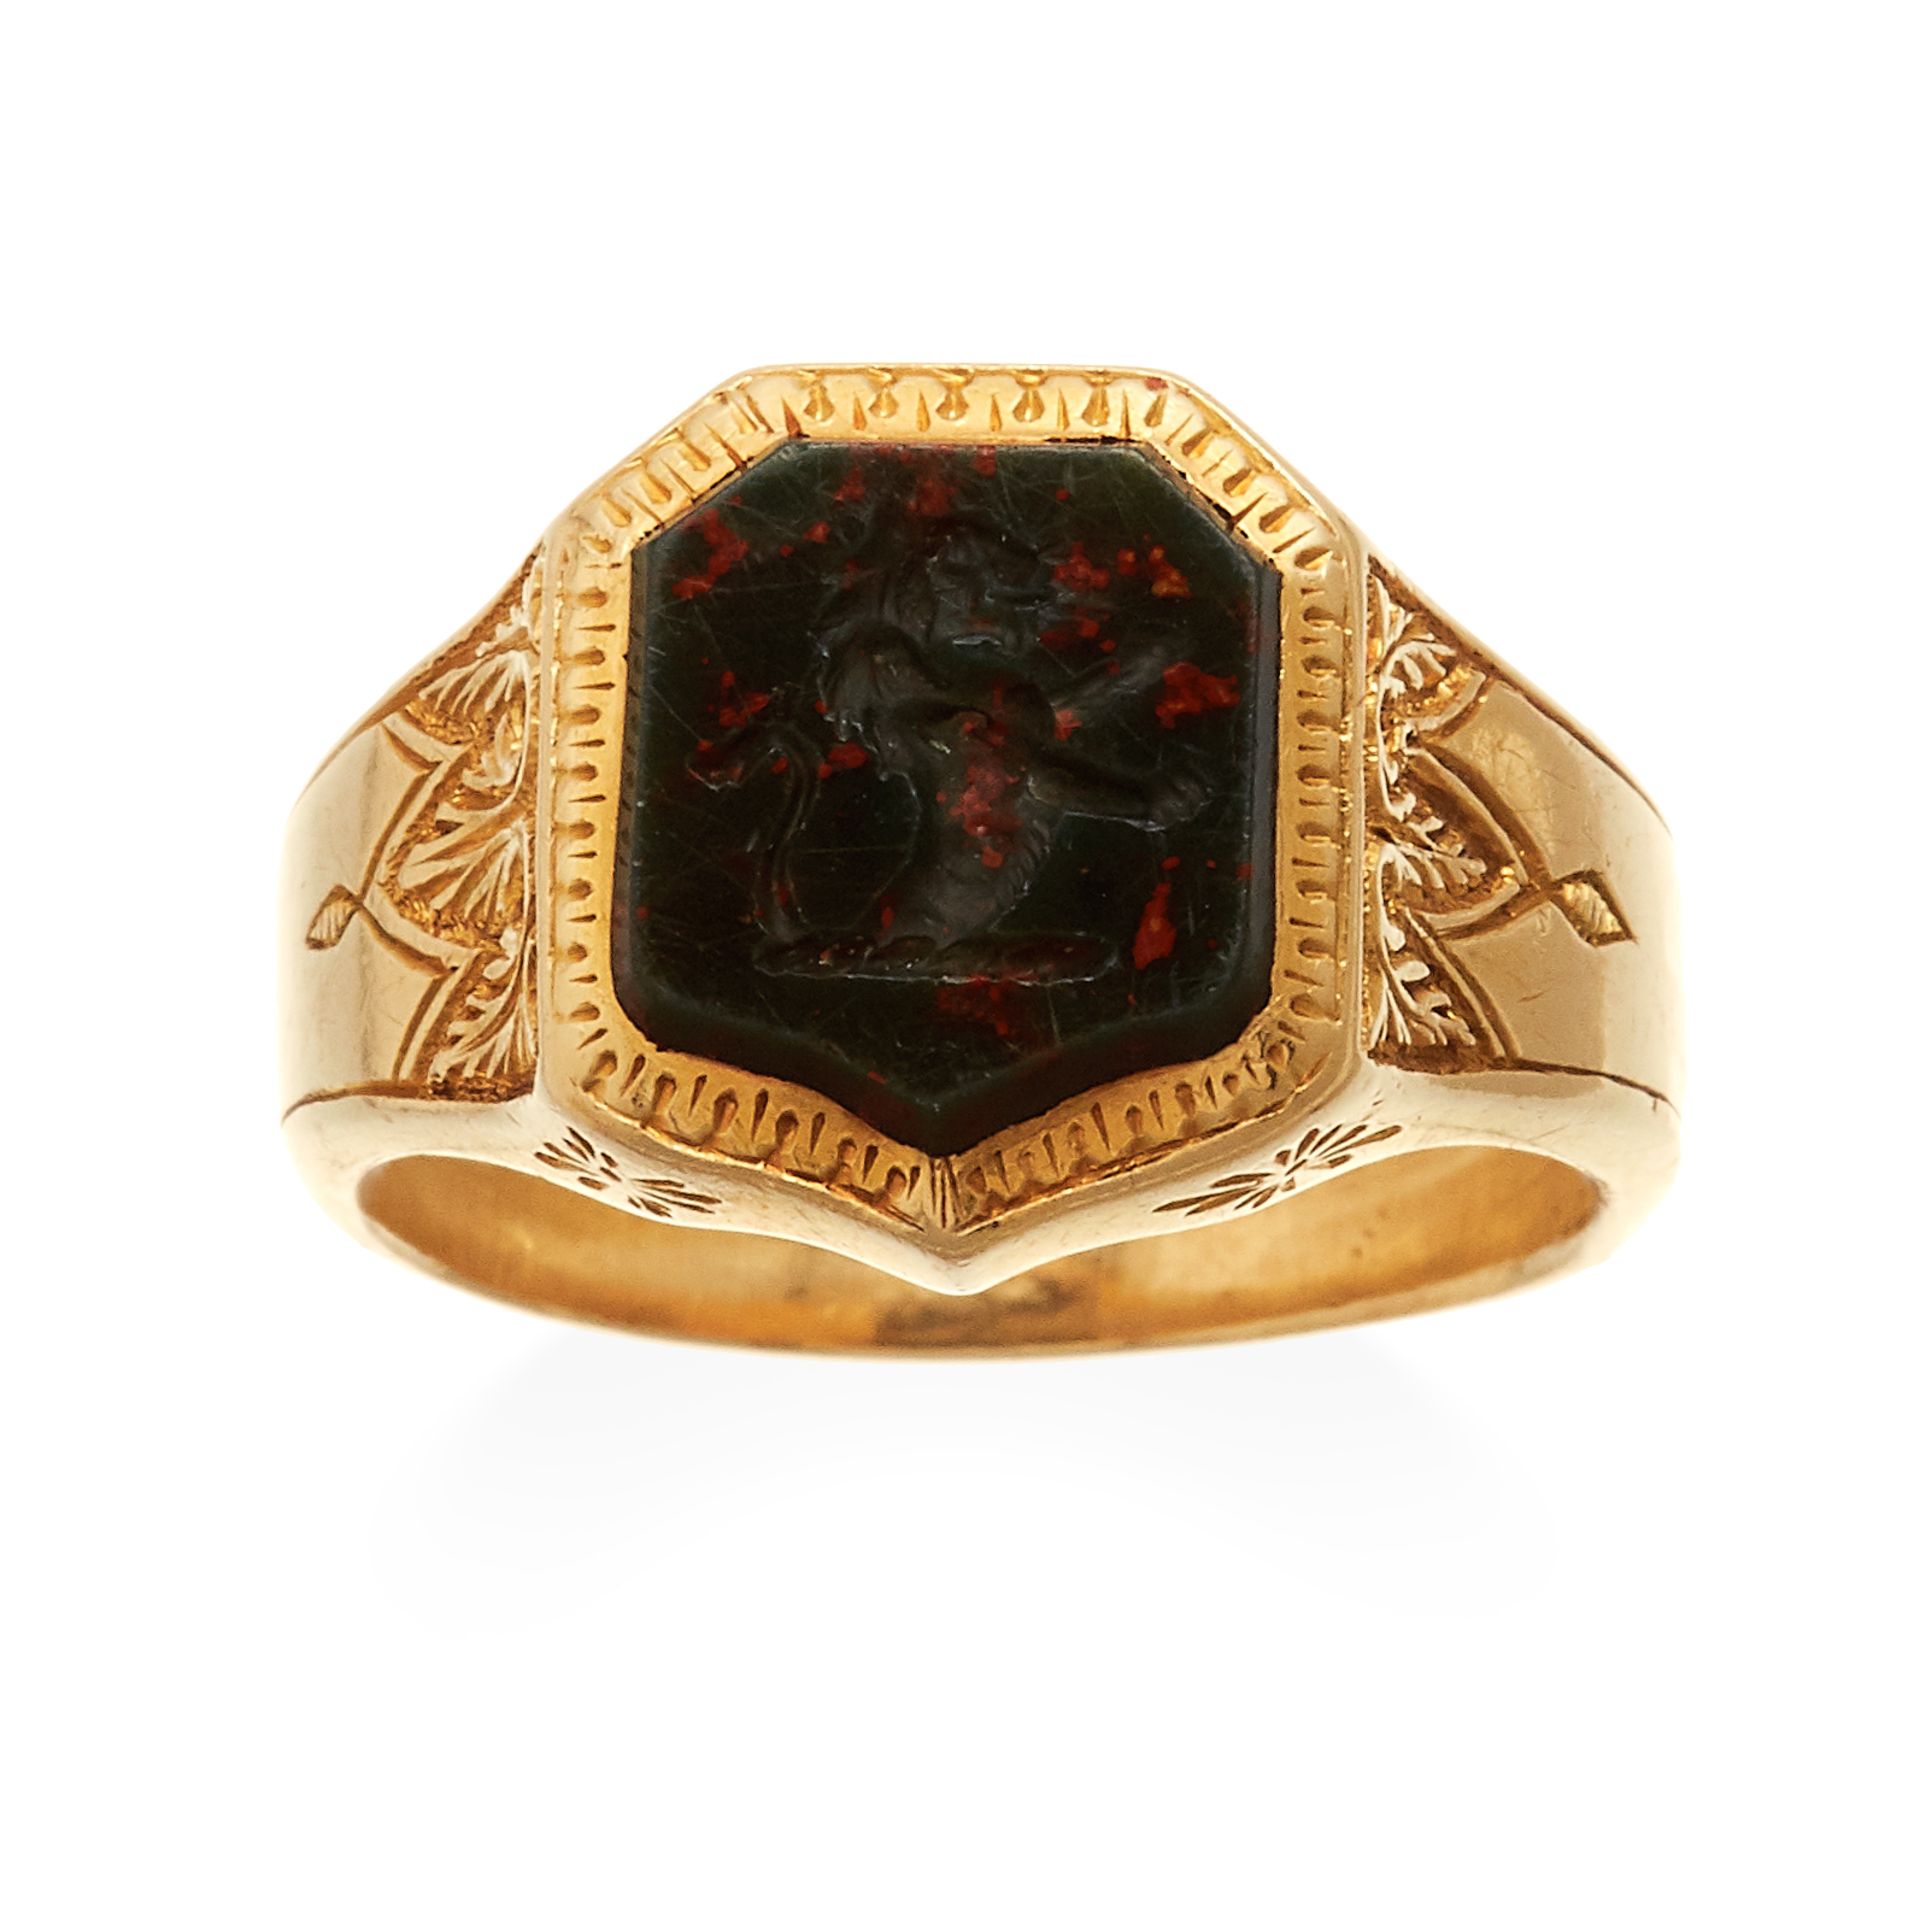 AN ANTIQUE CARVED INTAGLIO HARDSTONE SIGNET RING, 19TH CENTURY in 18ct yellow gold set with an